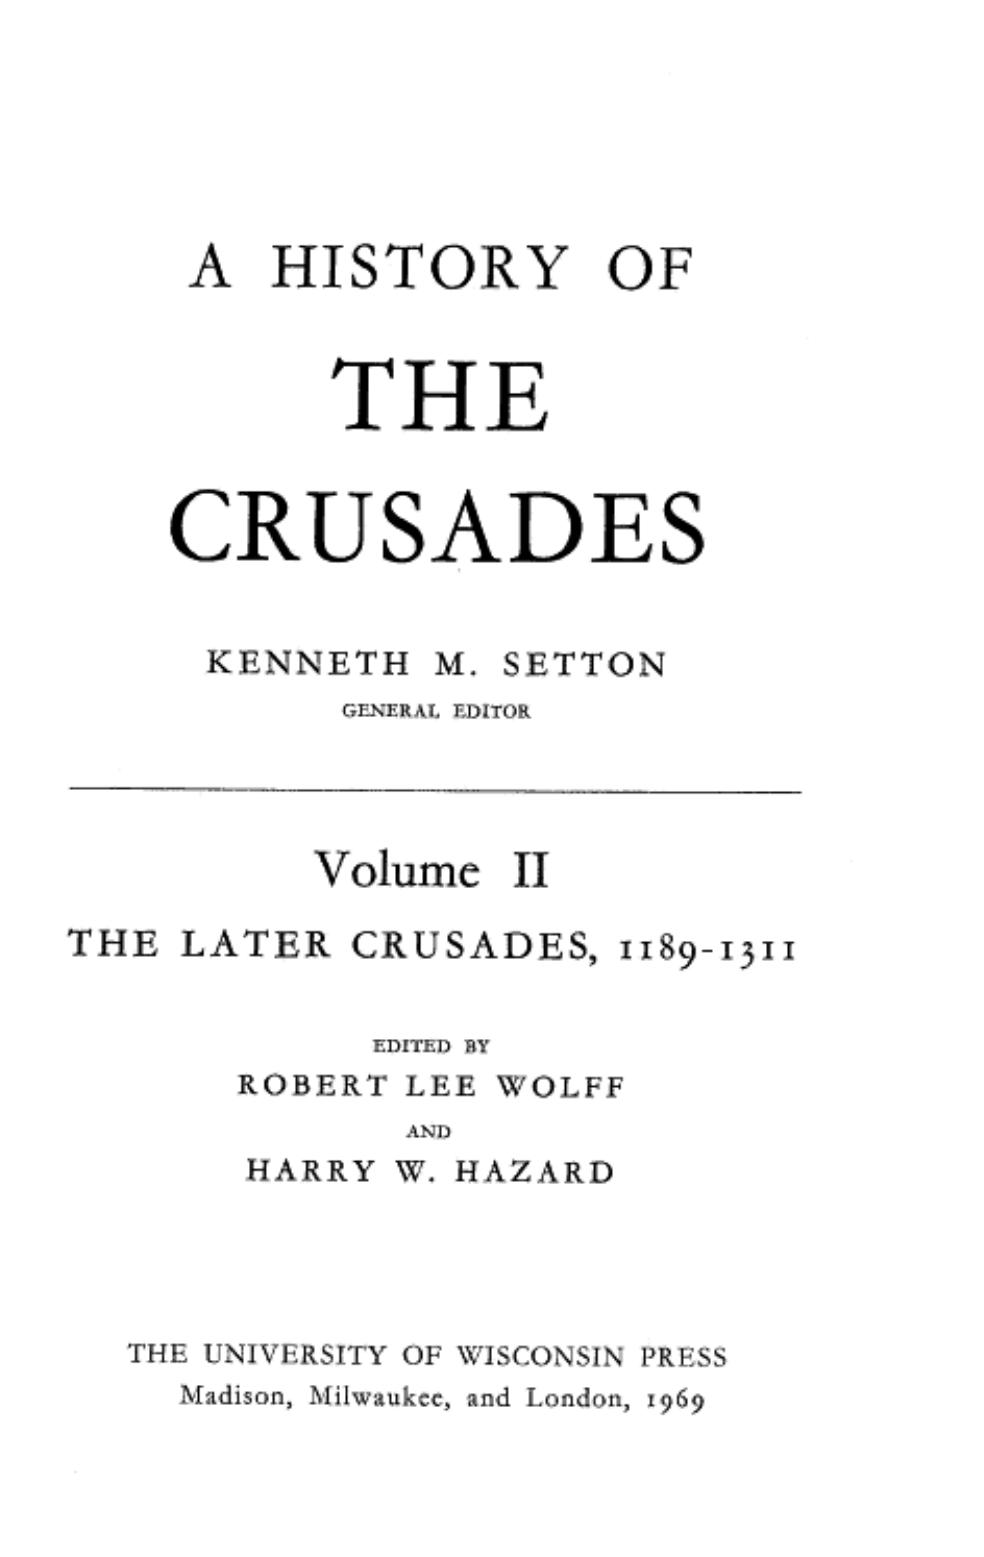 A History of the Crusades, Vol. II; The Later Crusades, 1189-1311